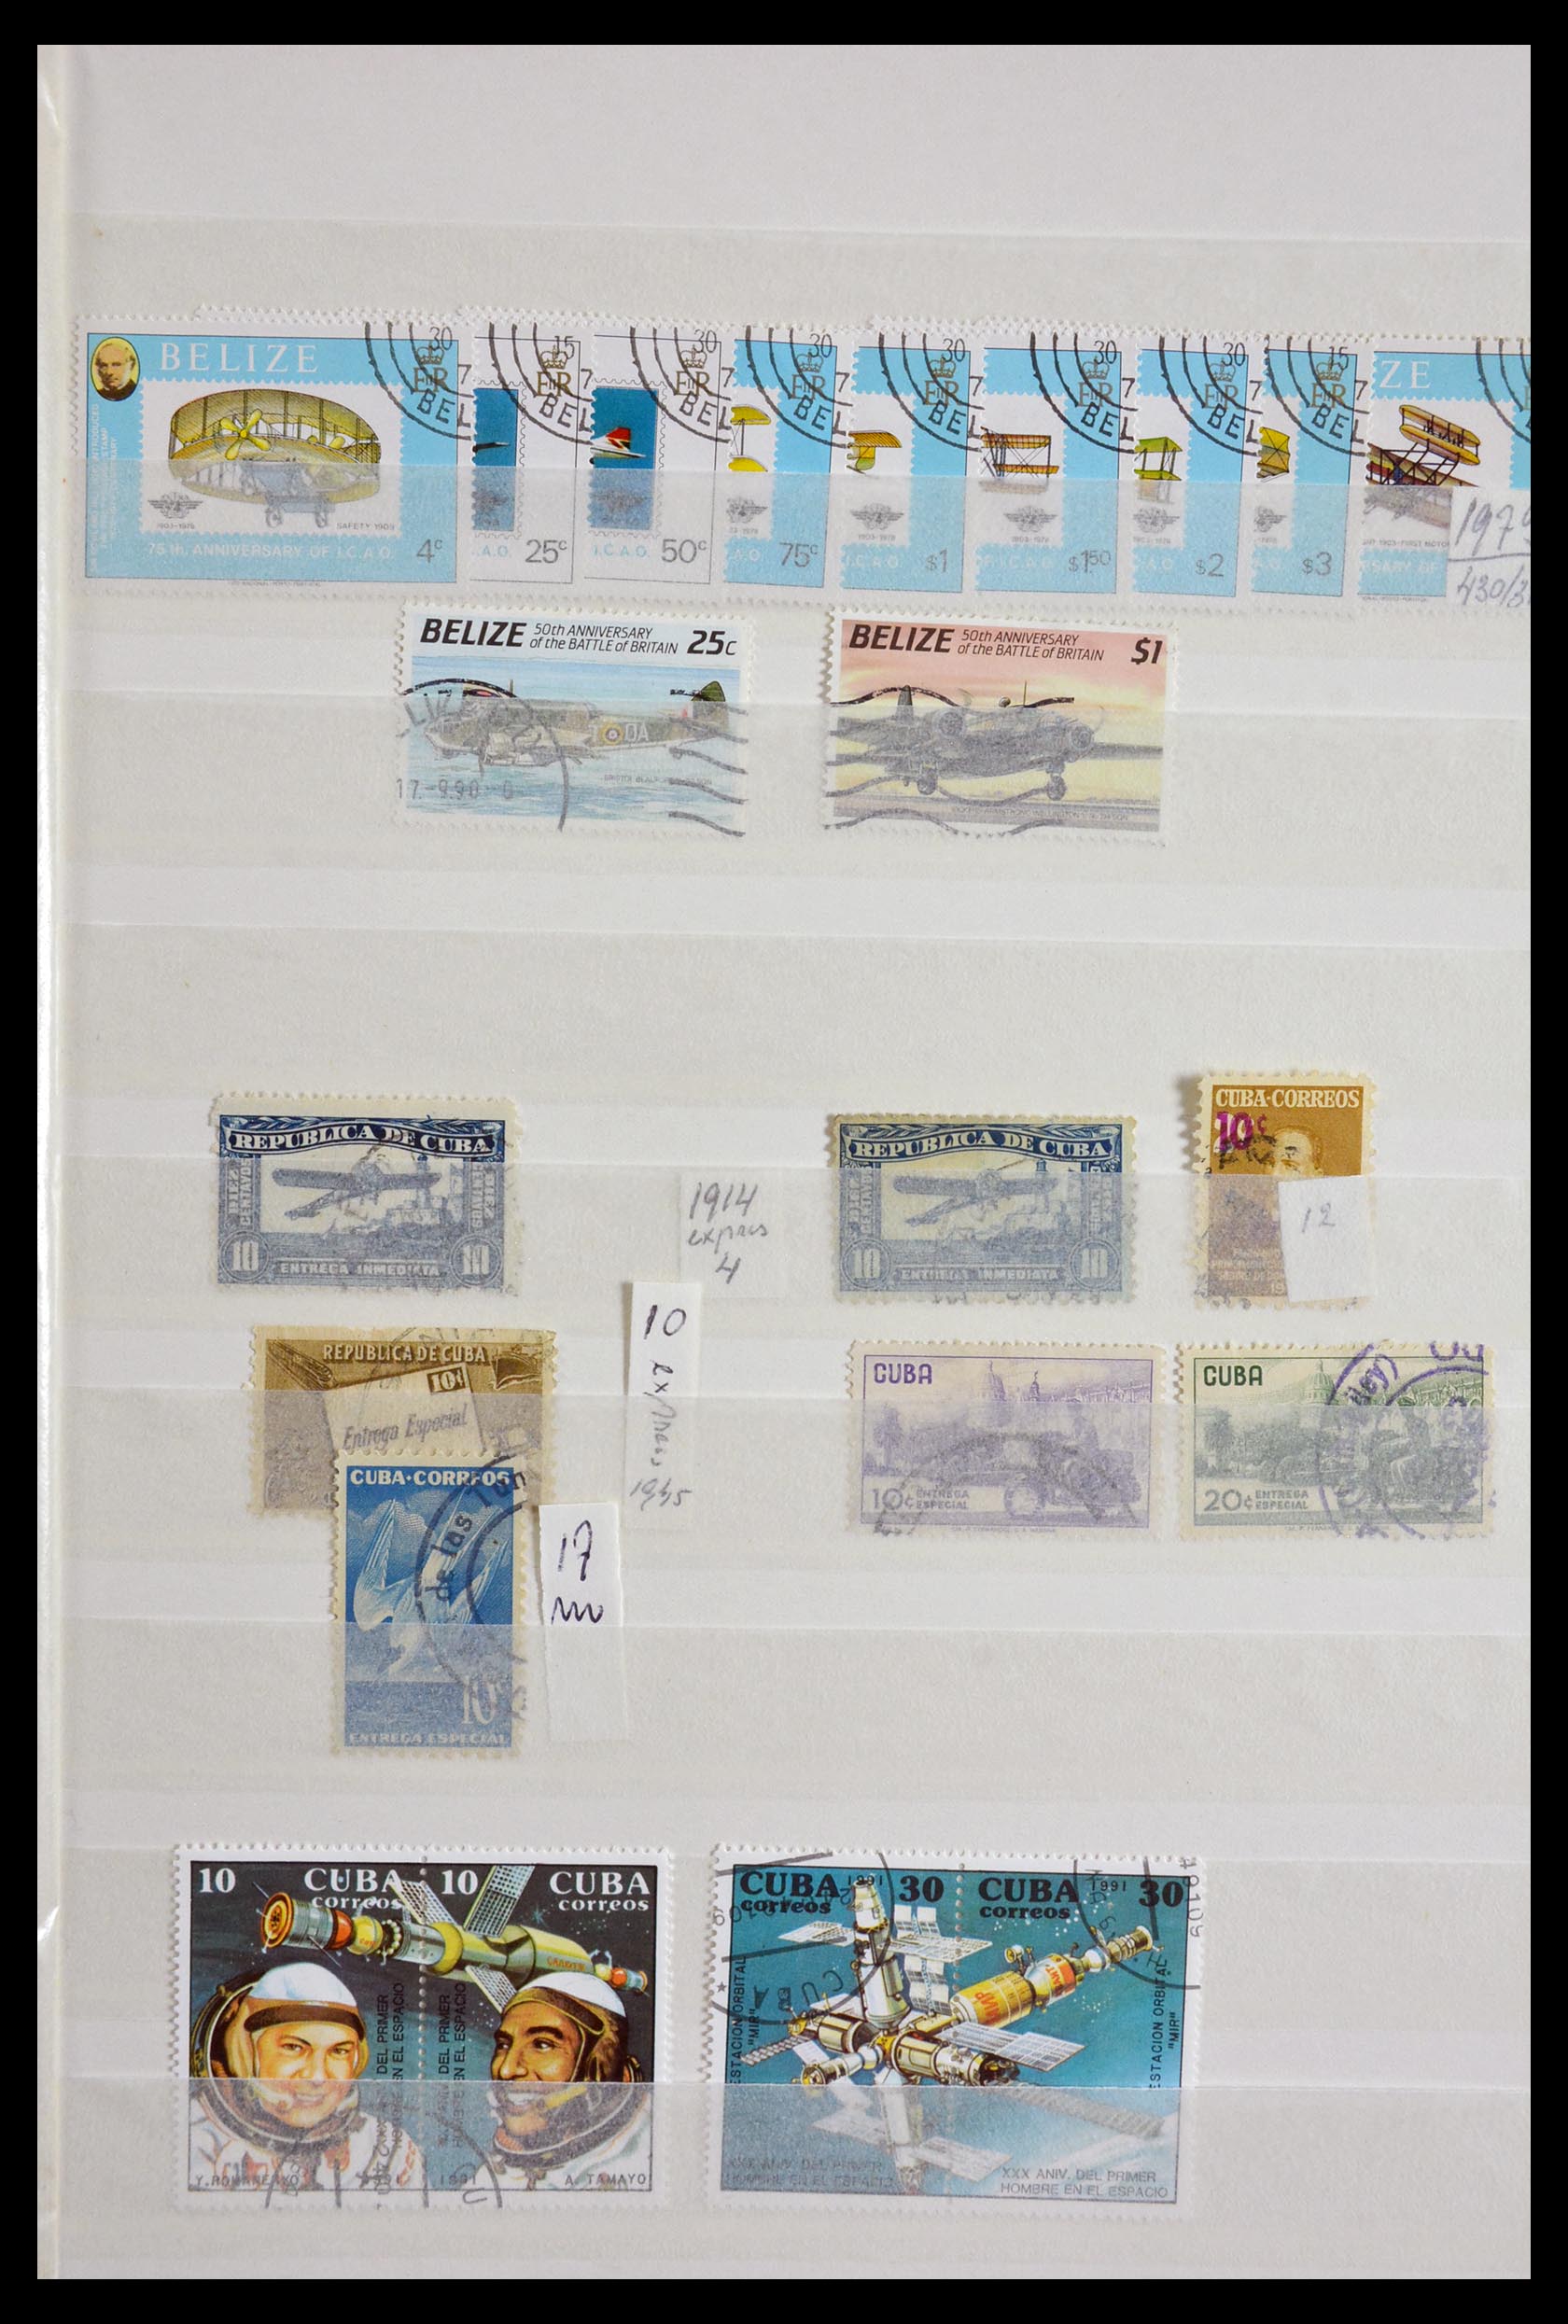 29917 055 - 29917 Latin America airmail stamps.